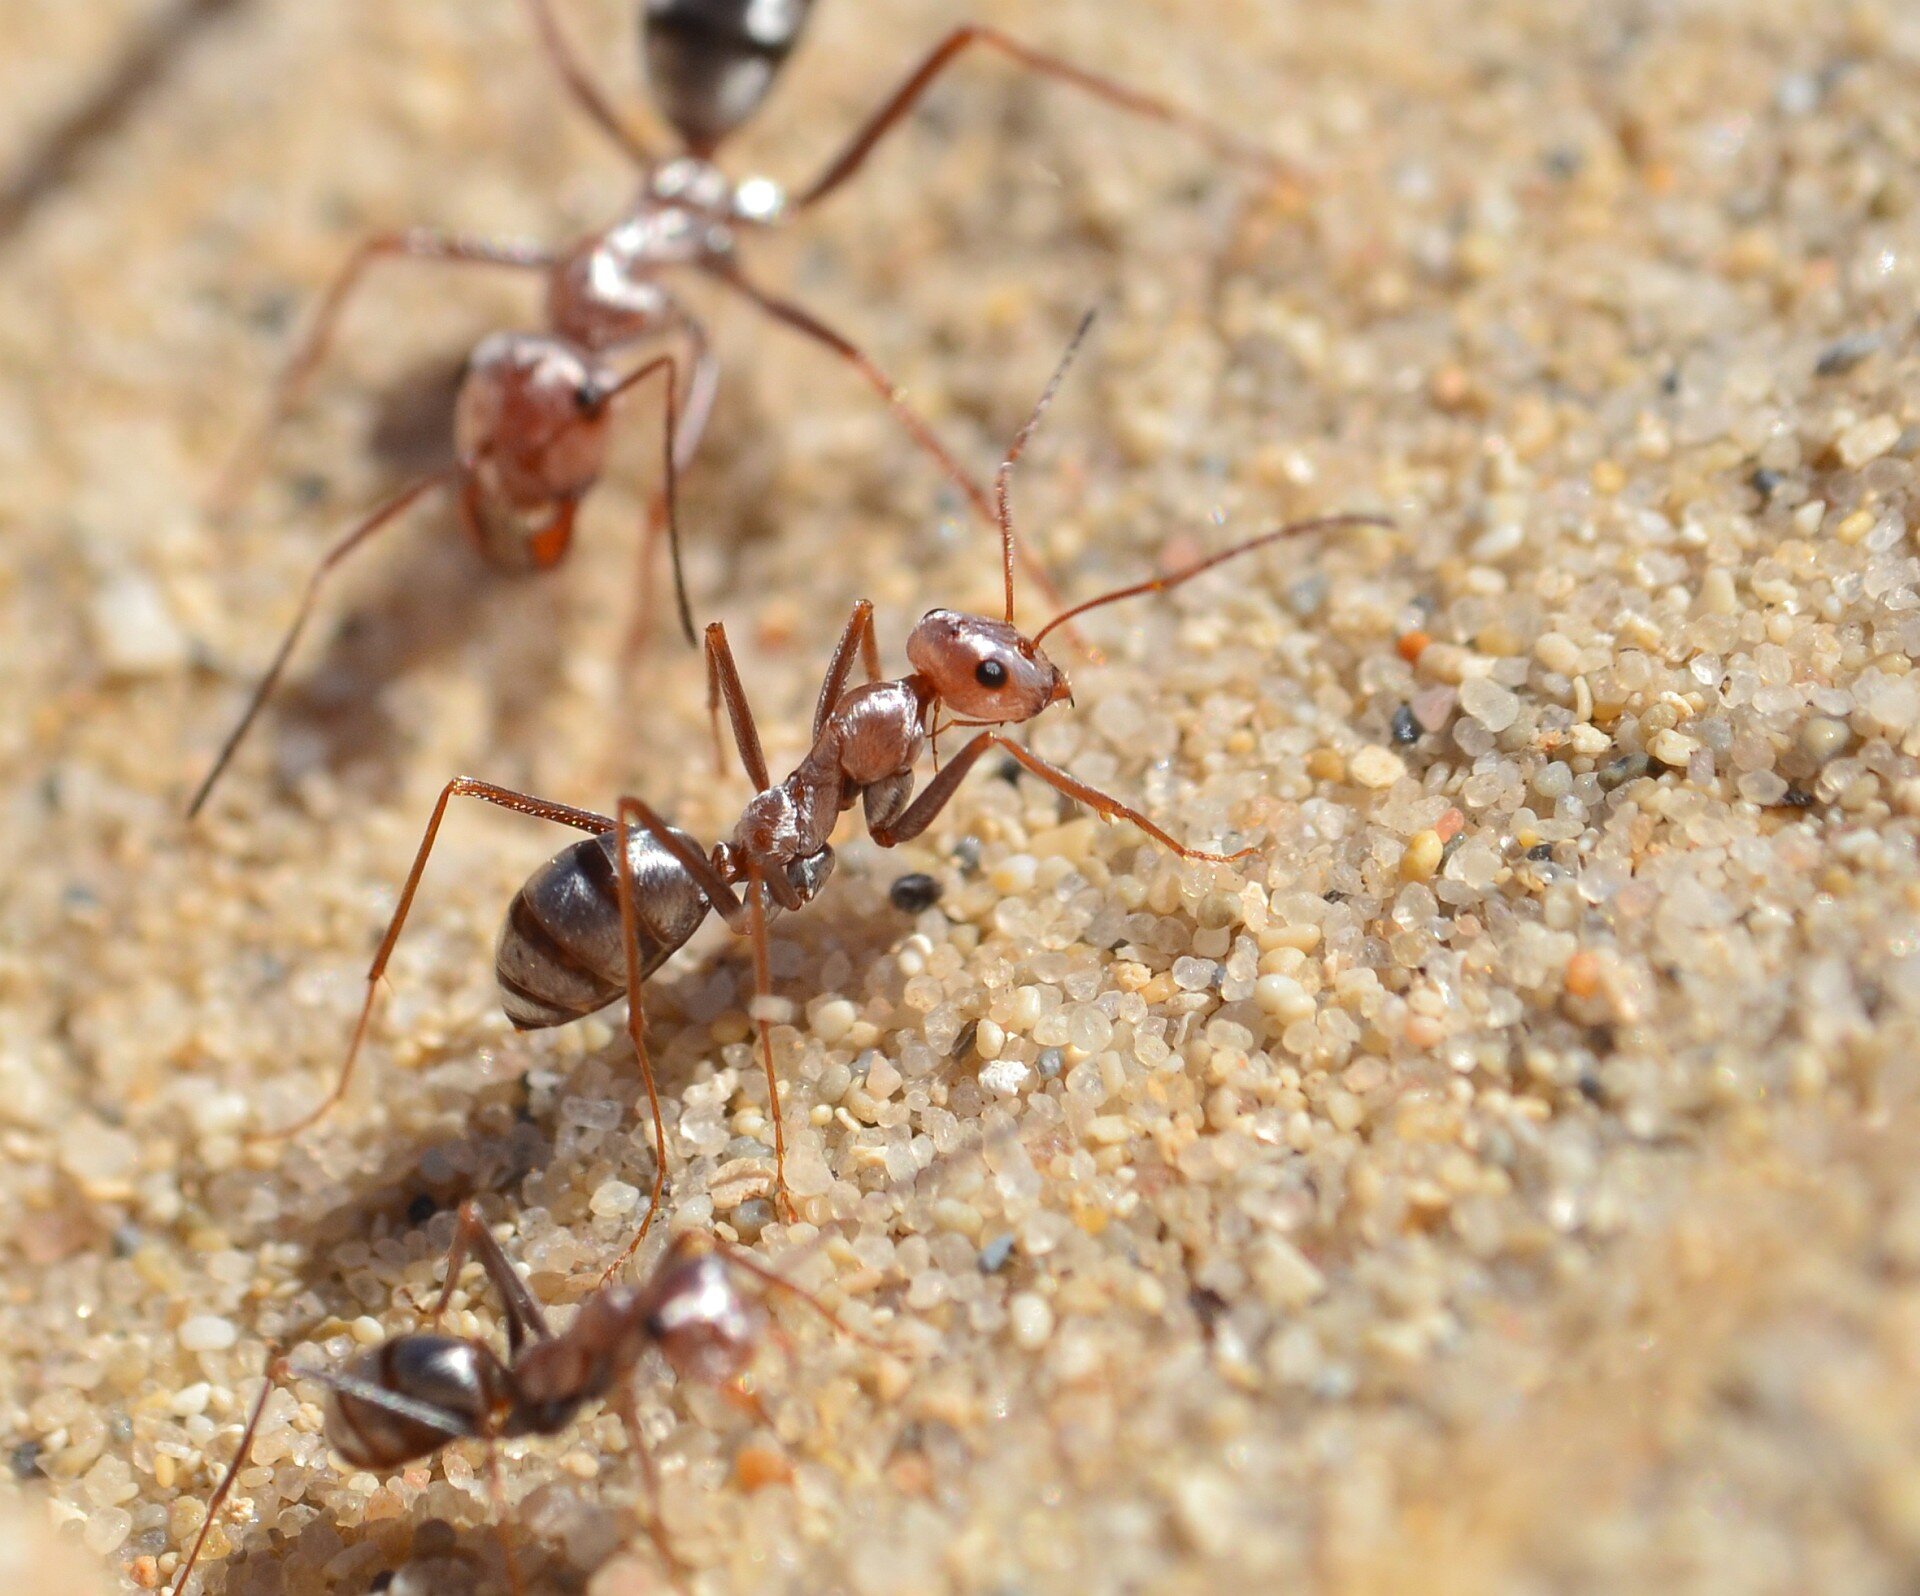 How Giant Ant Heads May Aid Bio-Inspired Designs